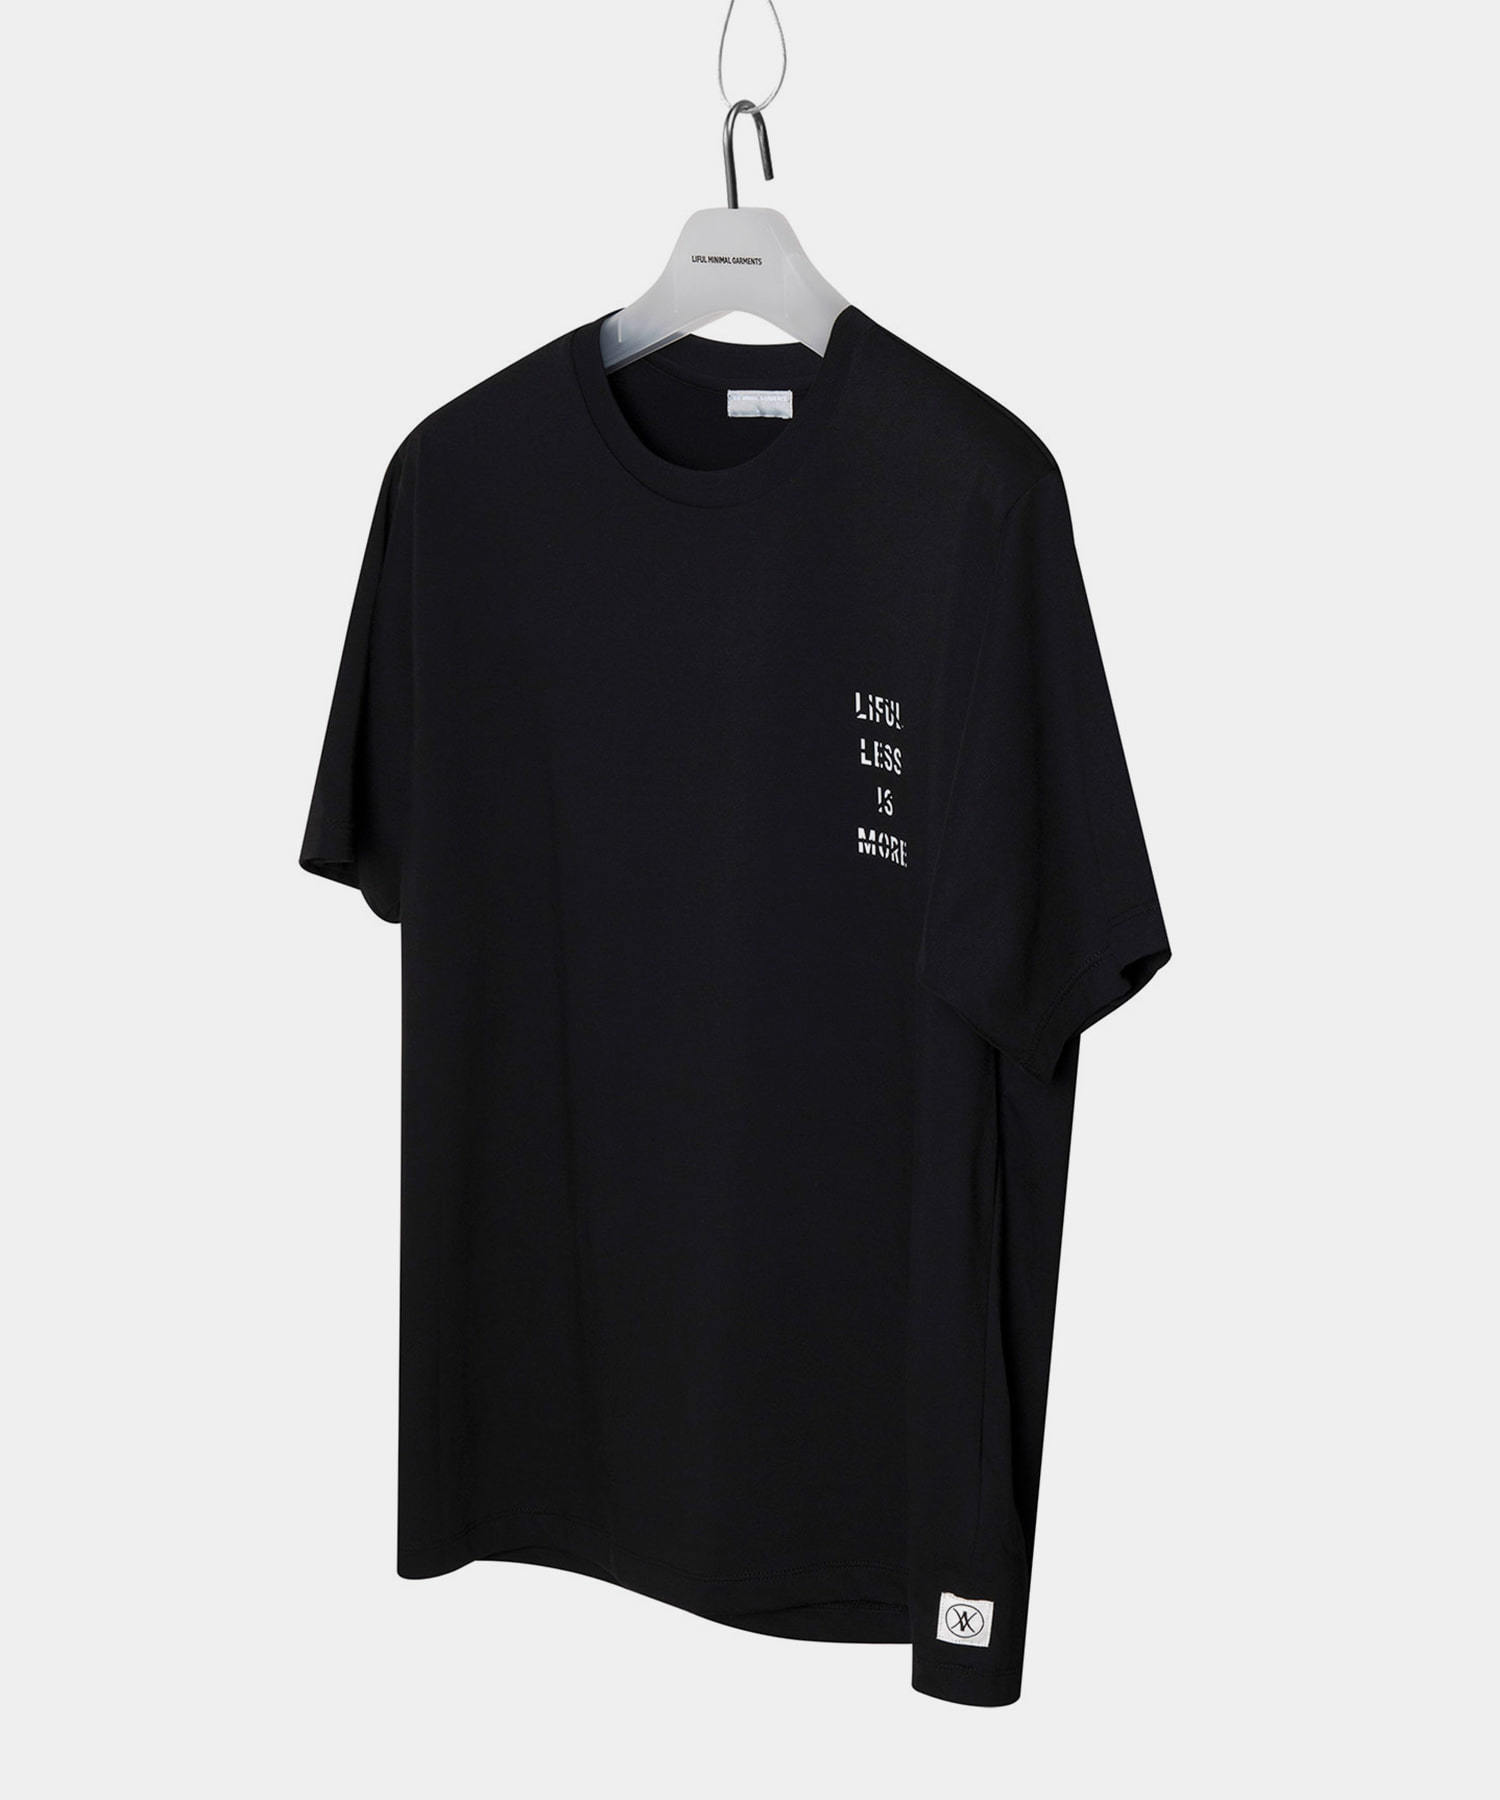 LESS IS MORE TEE black